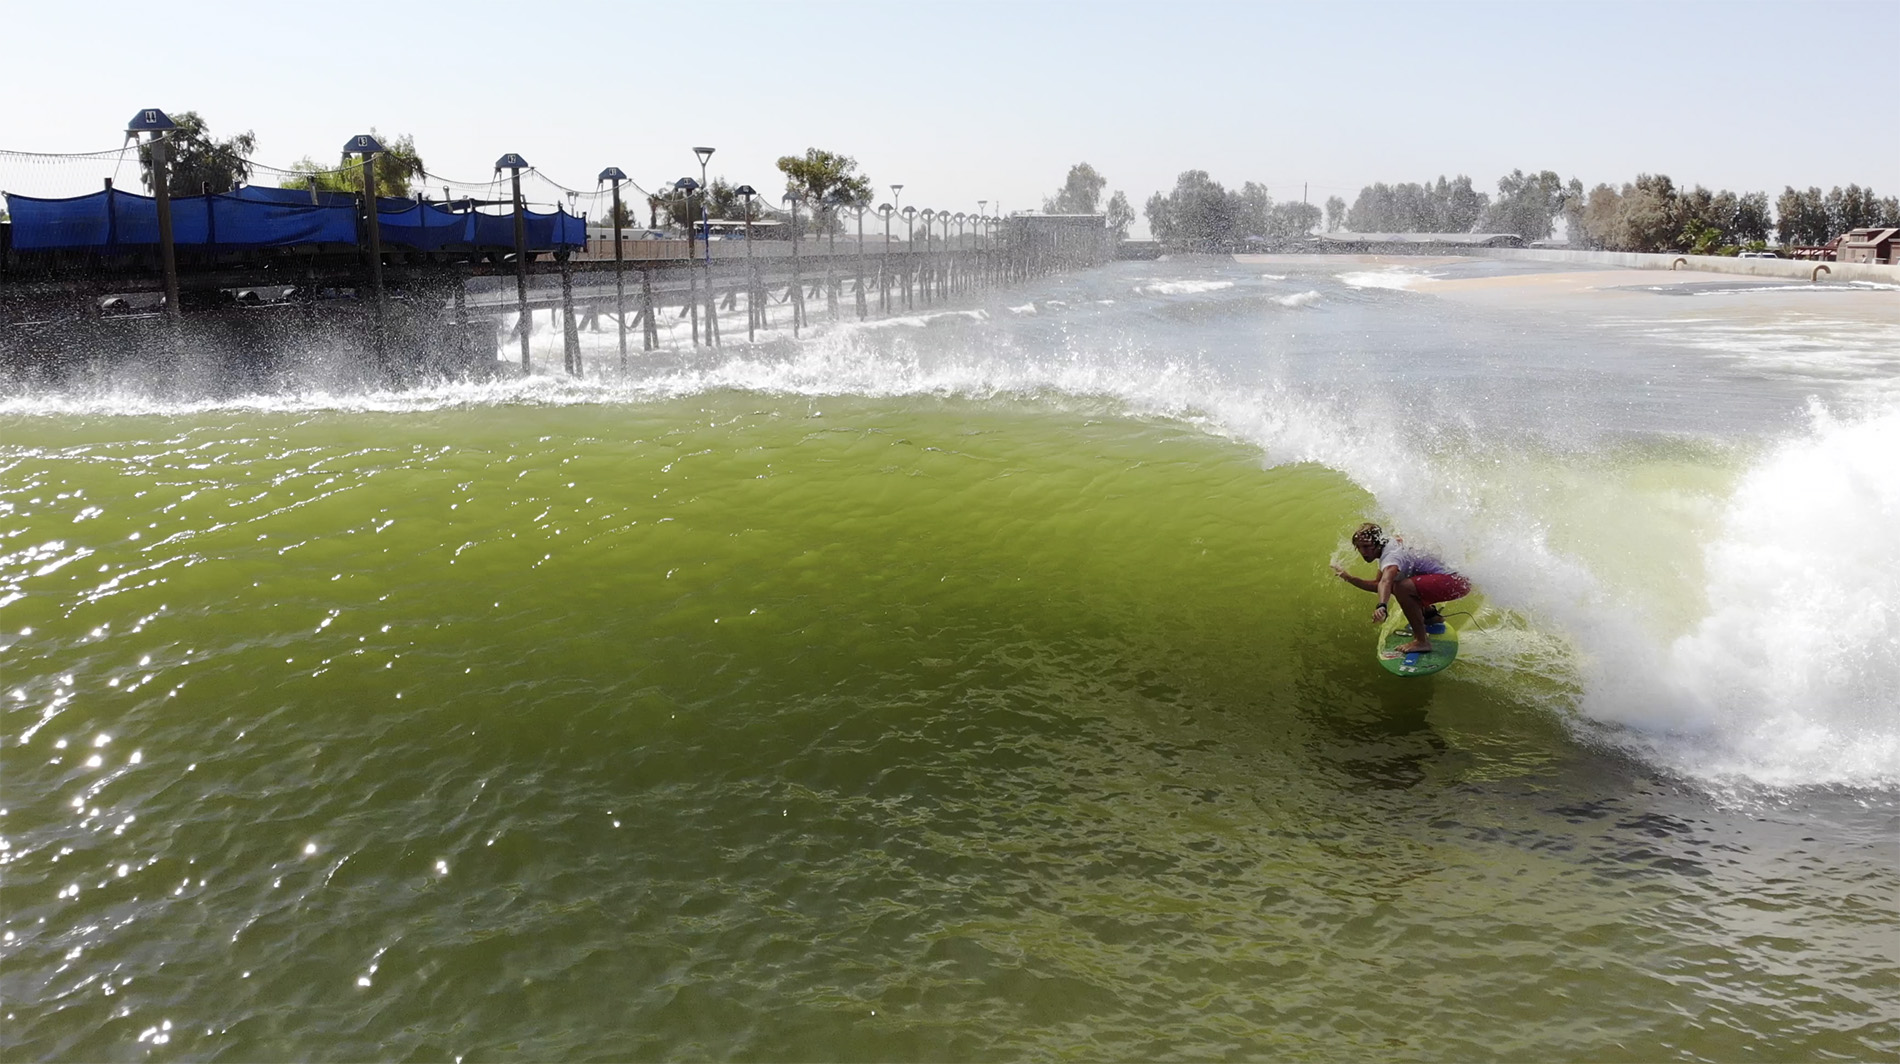 Lucas Fink at the Surf Ranch